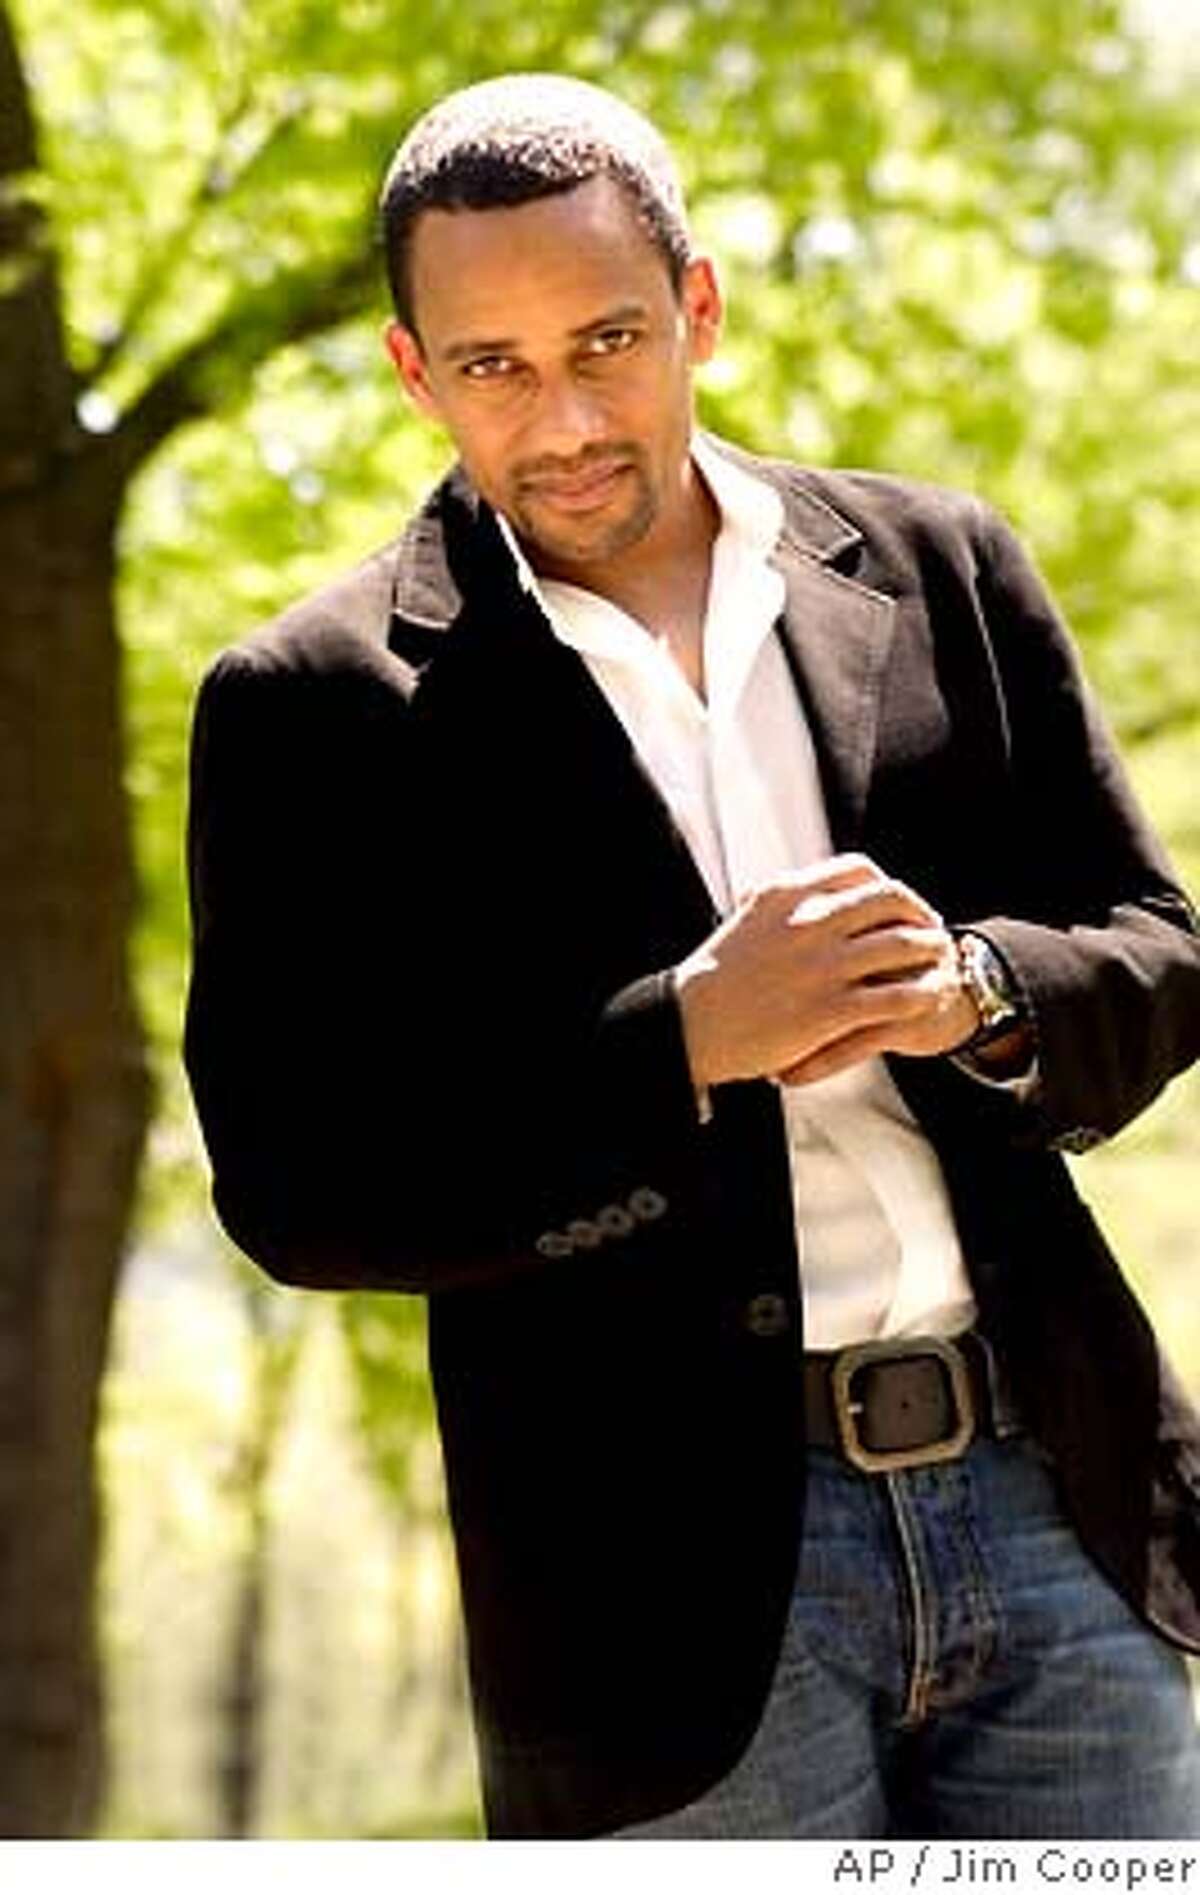 ** ADVANCE FOR WEEKEND EDITIONS, MAY 11-14 **Actor Hill Harper poses in New York's Central Park on April 27, 2006. Harper, who portrays Dr. Sheldon Hawkes on the CBS drama "CSI: NY," just published his first book, "Letters to a Young Brother: MANifest Your Destiny." (AP Photo/Jim Cooper) ADVANCE FOR WEEKEND EDITIONS, MAY 11-14